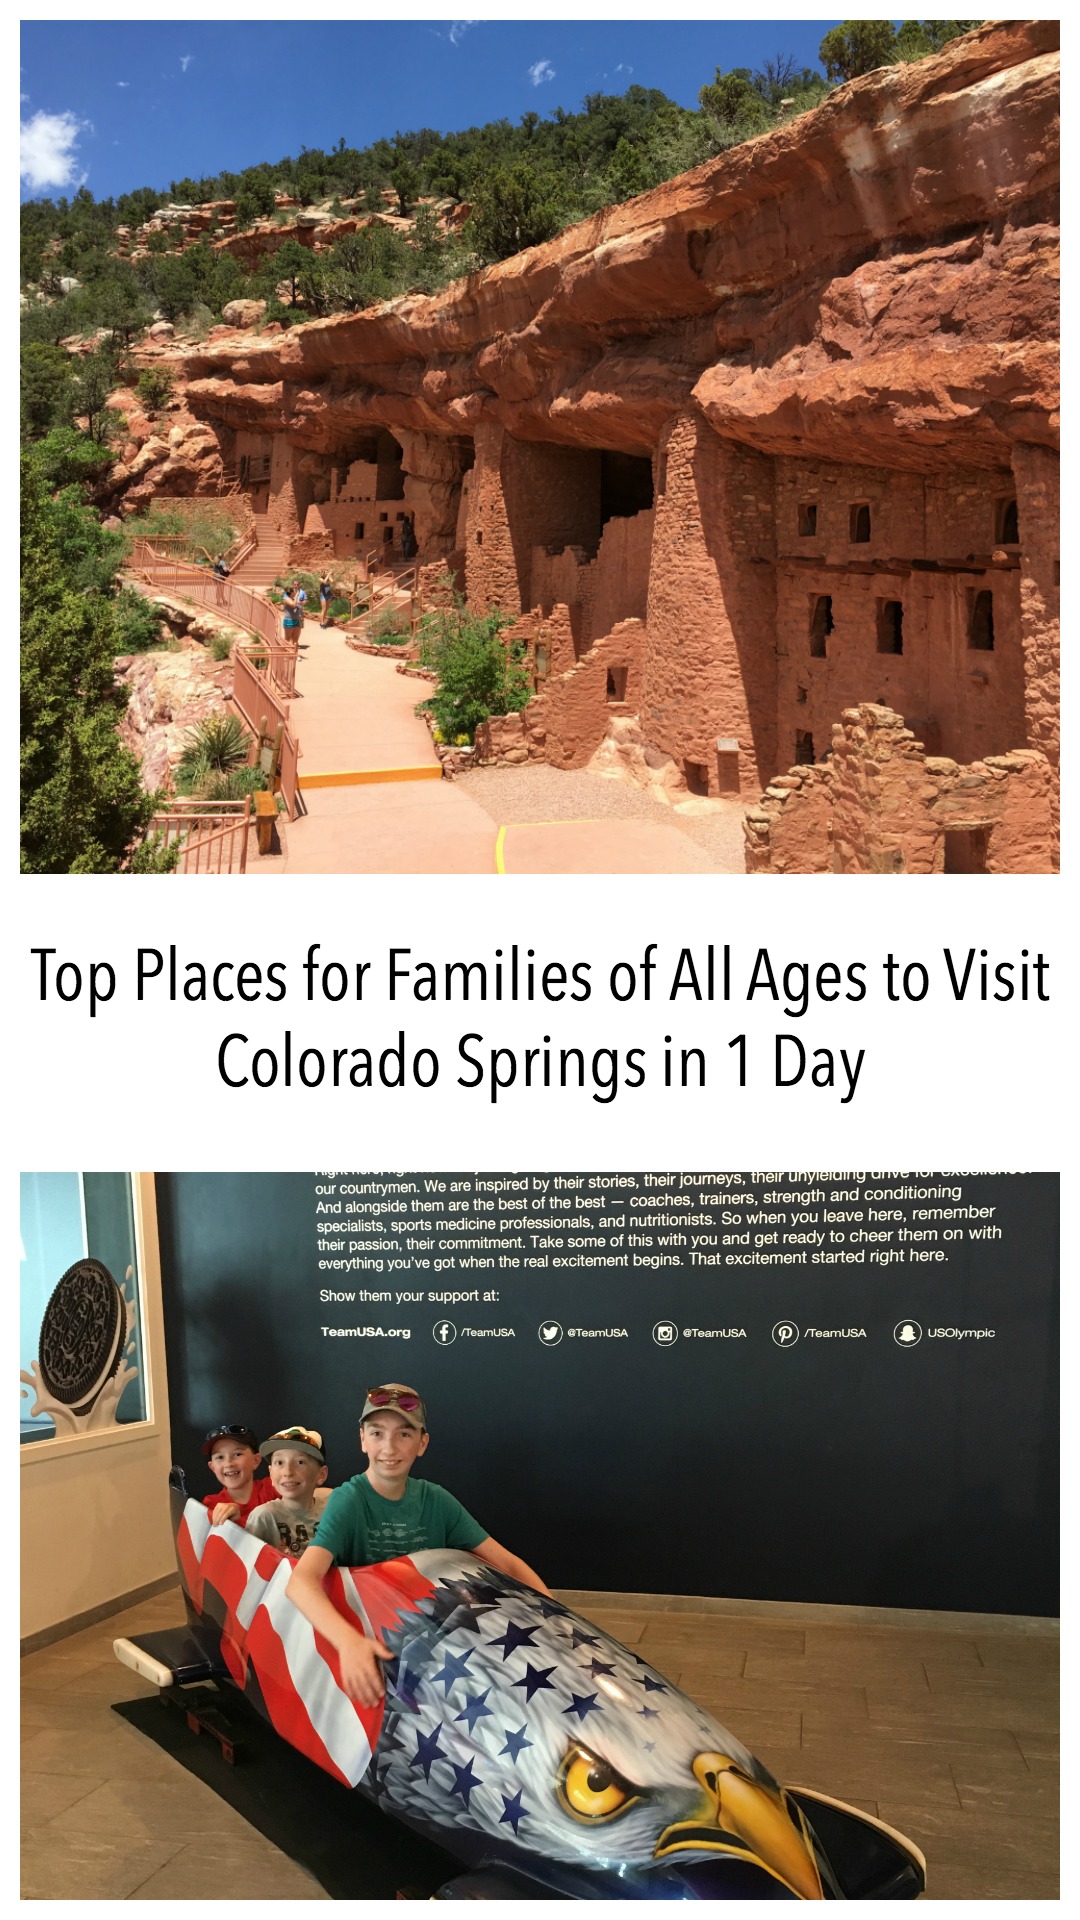 Top Places for Families of All Ages Visit Colorado Springs in 1 Day